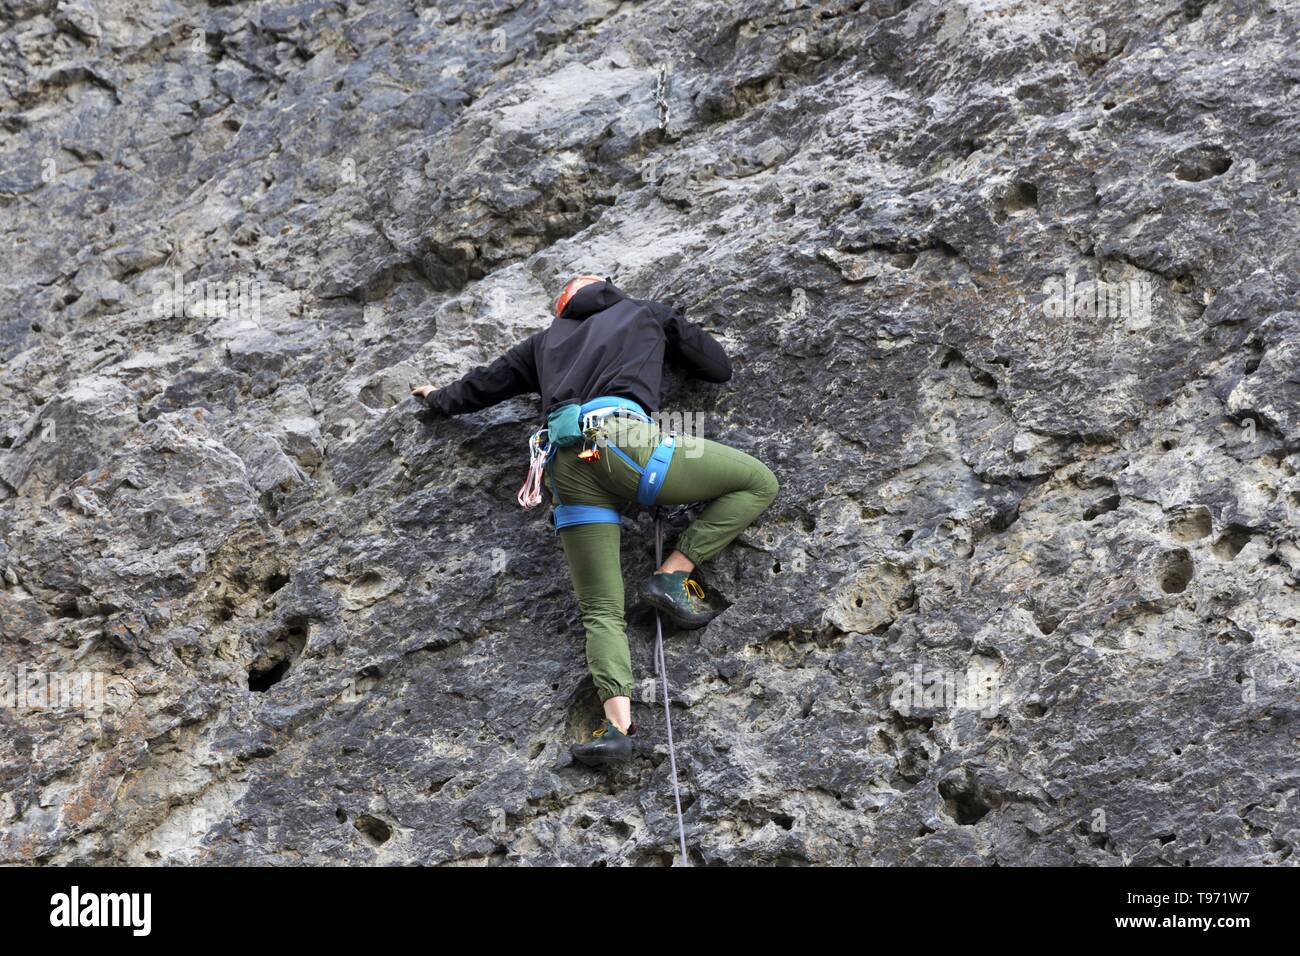 Athletic Male Climber Technical Climbing Vertical Rock Wall at Grassi Lakes above City of Canmore Canadian Rocky Mountains Stock Photo